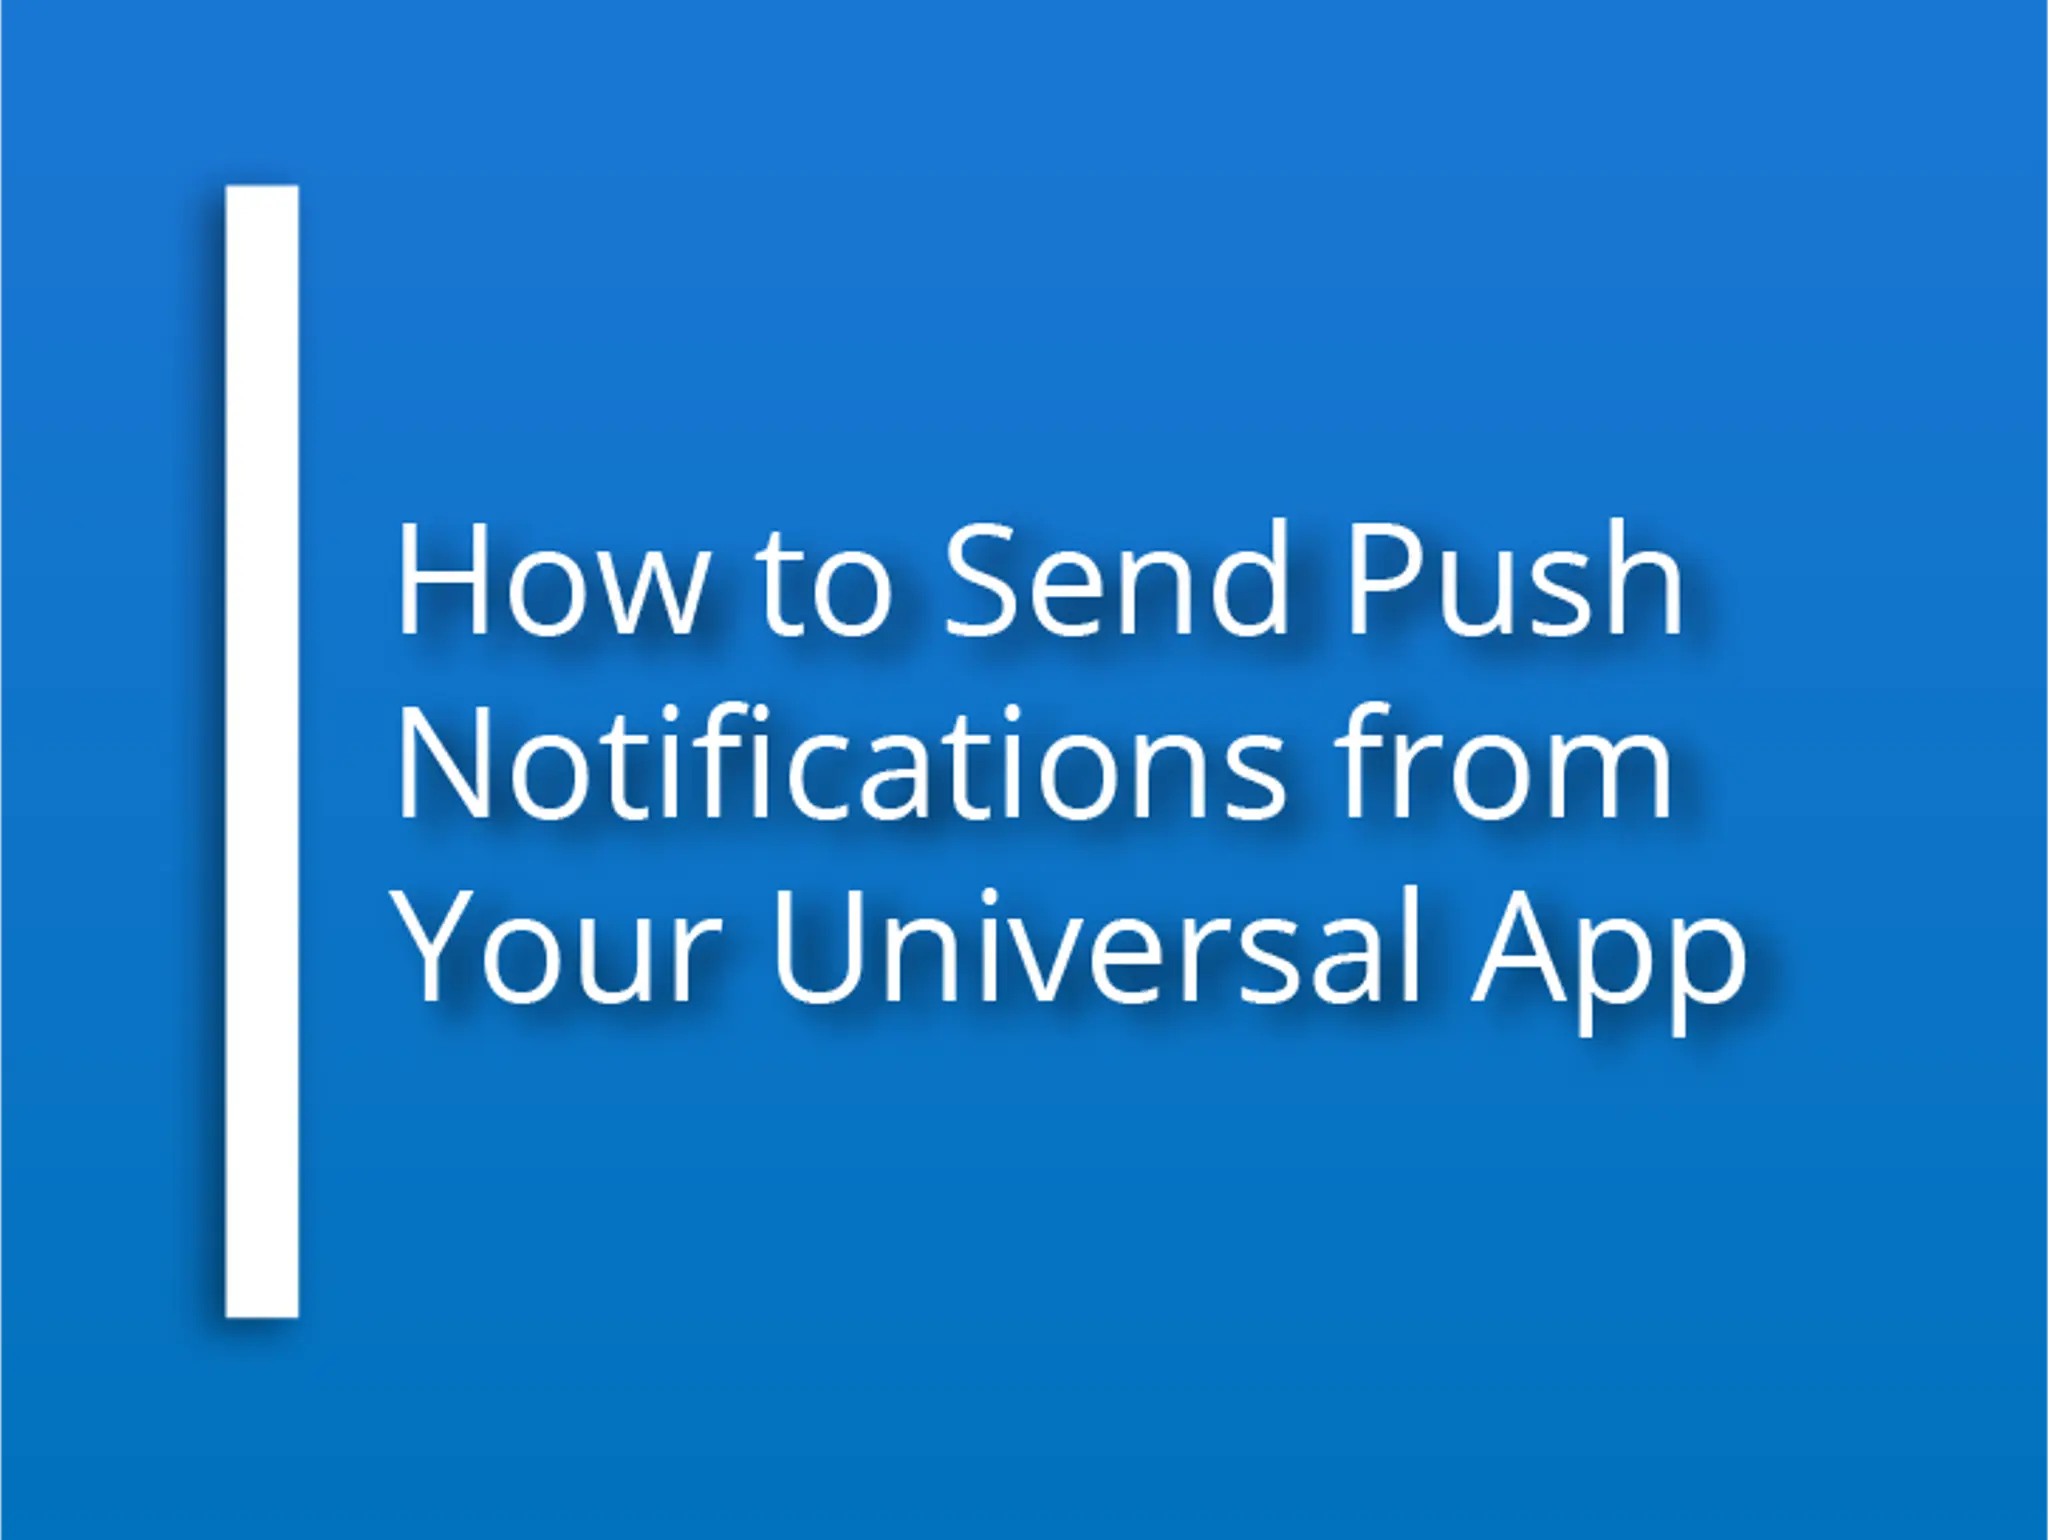 How to Send Push Notifications from Your Universal App